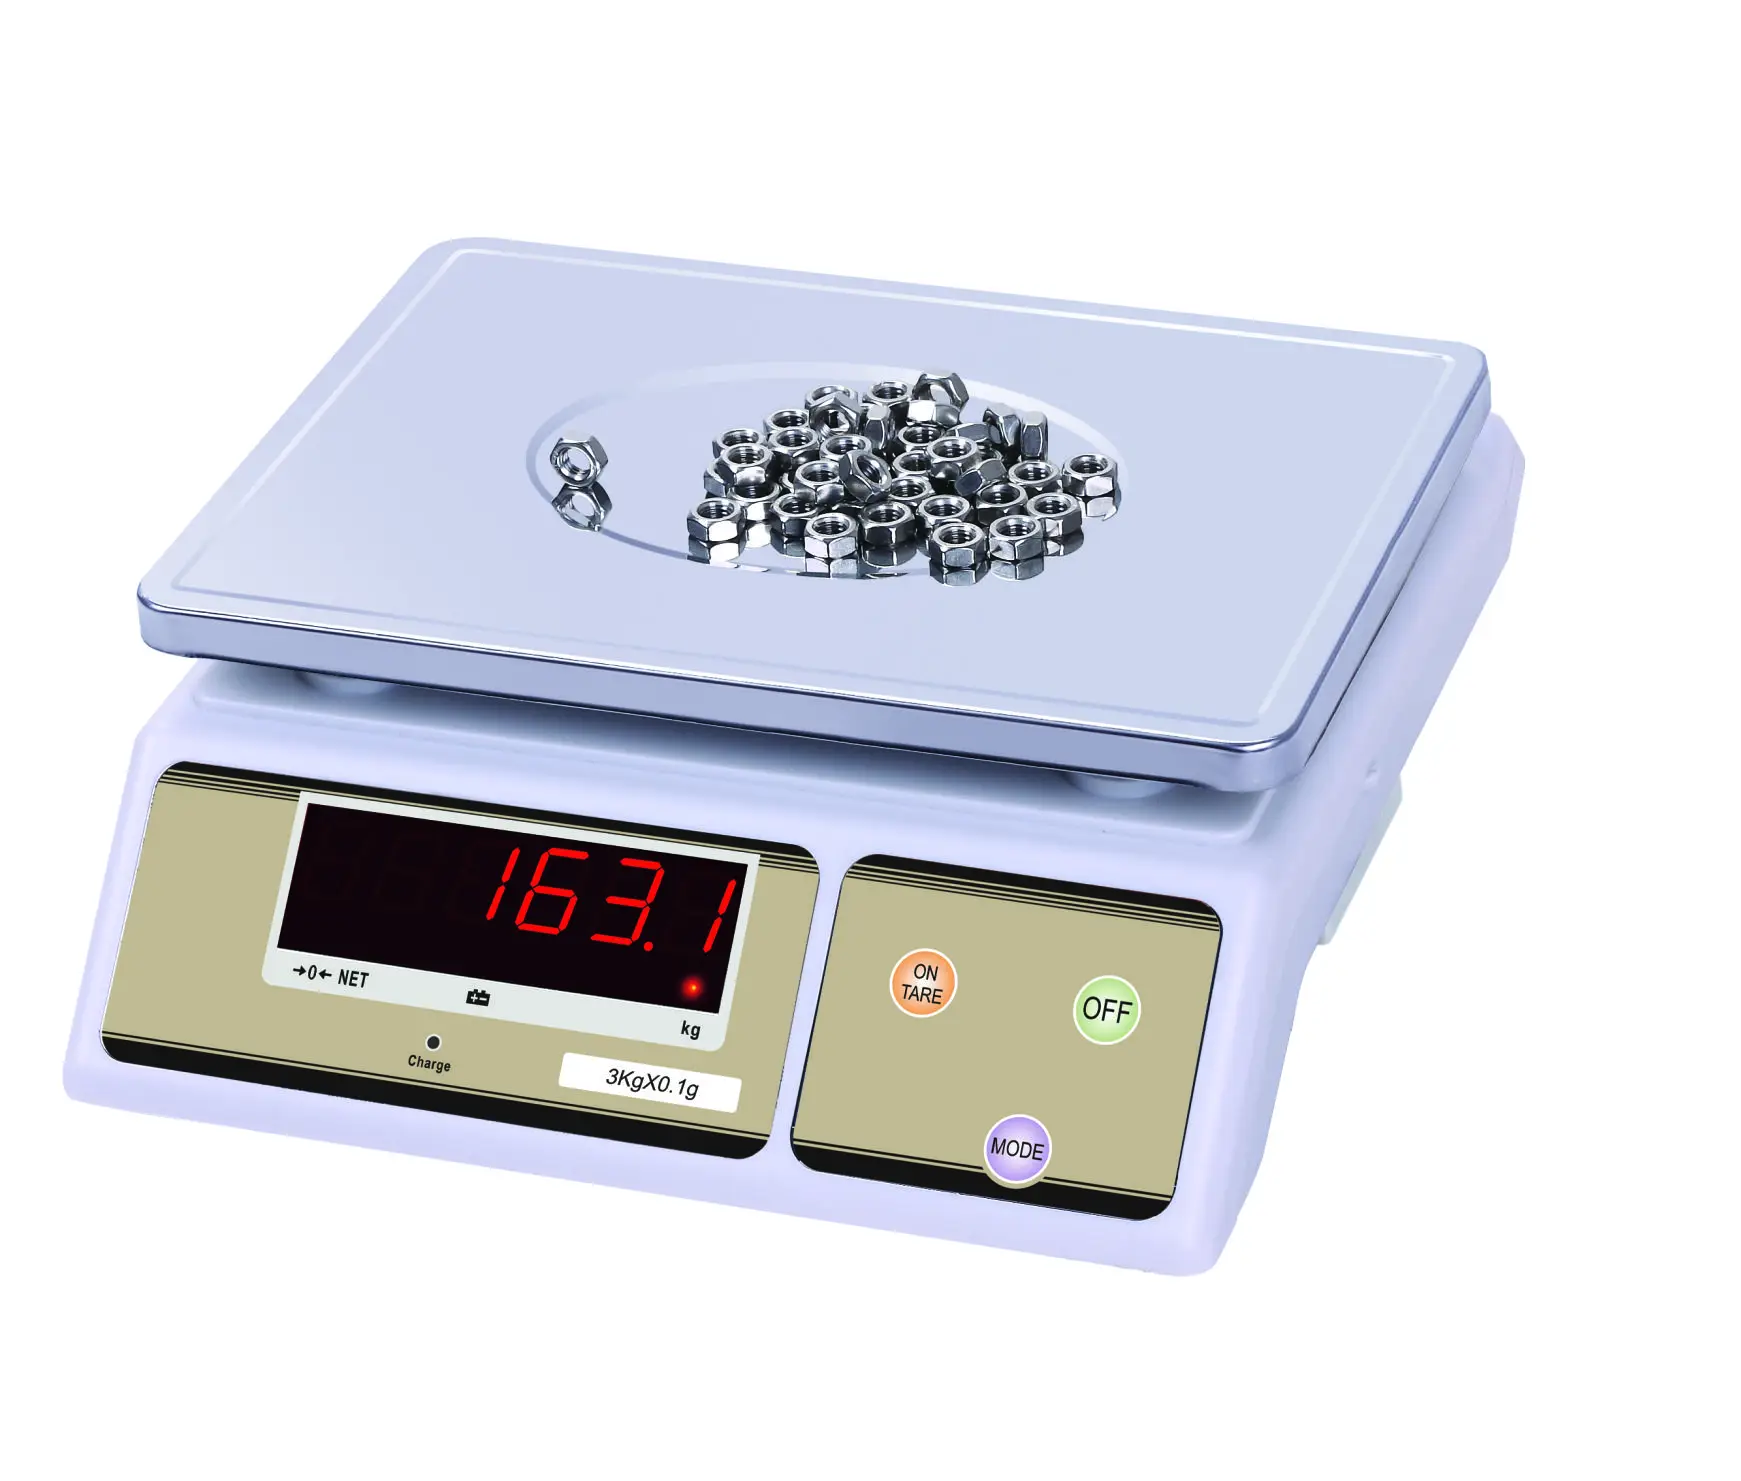 Digital Weighing  Scale kitchen scale3Kg 0.1g 6Kg0.2g 15Kg0.5g 30kg1gFood Scales Digital Weight Gram and Oz Scale with LCD/ Tare 5 10kg electronic kitchen scale measuring tool food scales diet scales slim lcd digital electronic weighing scale household